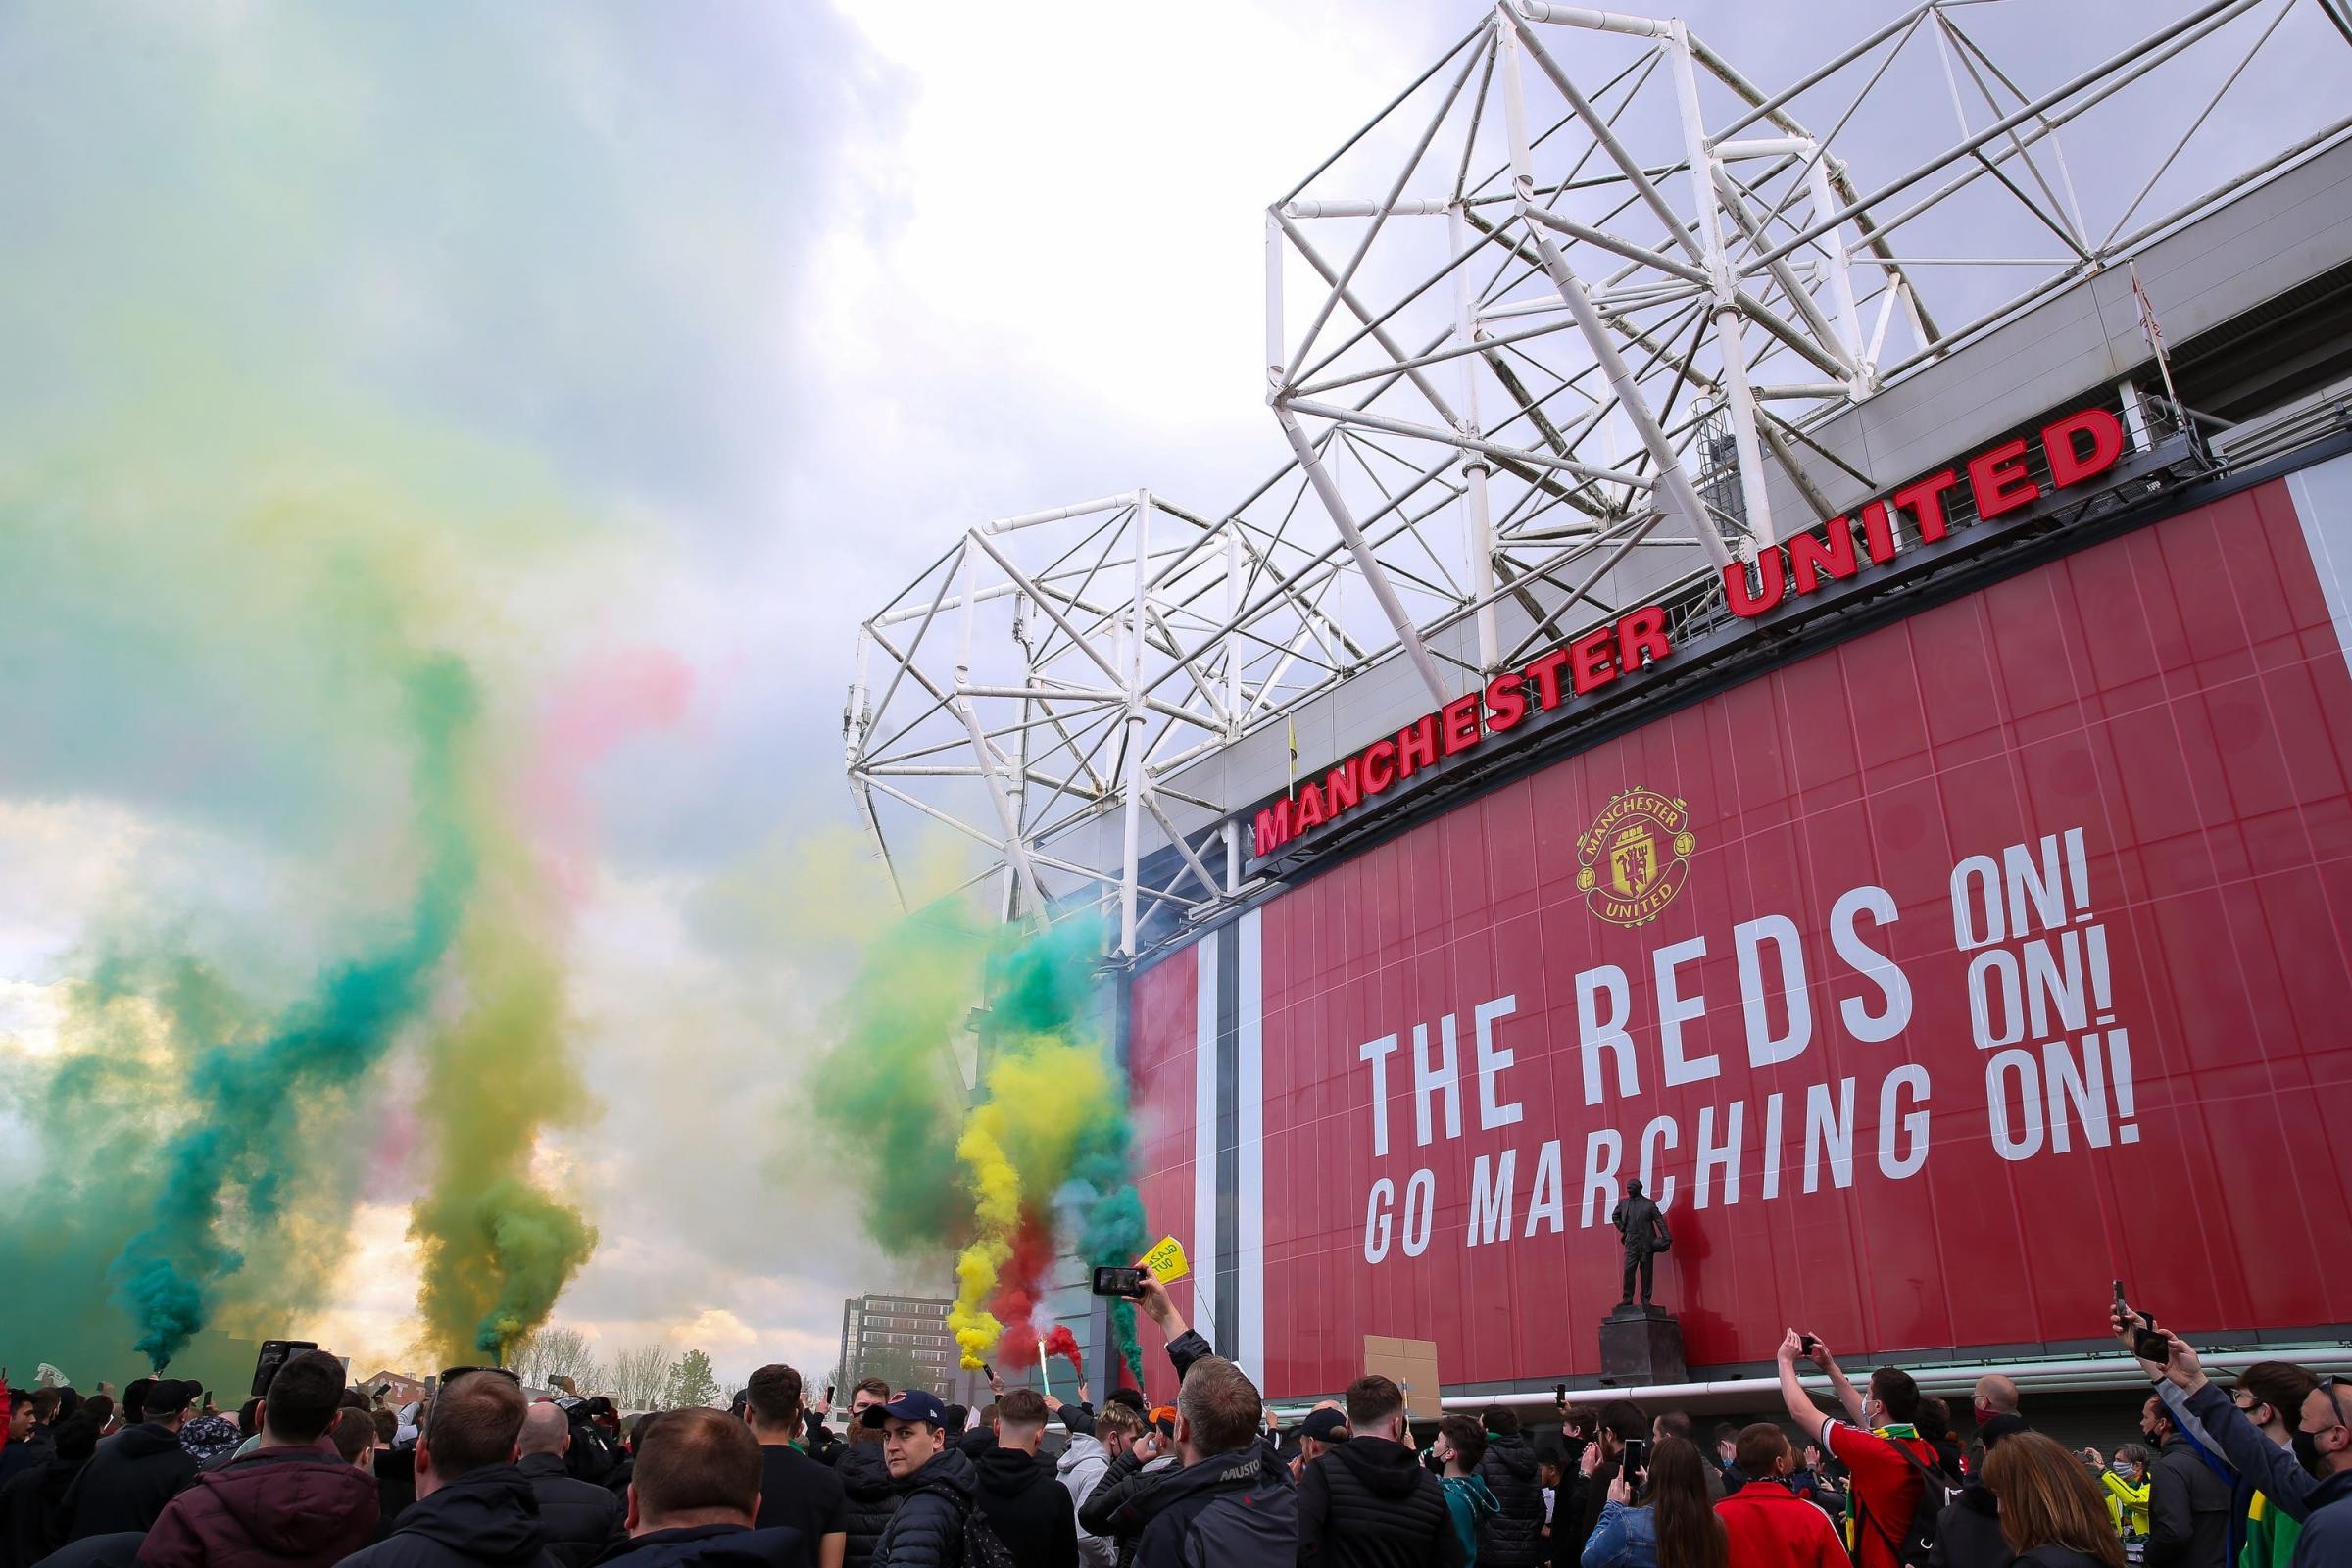 Fans let off flares as they protested against the Glazer family, the owners of Manchester United. Photo: PA